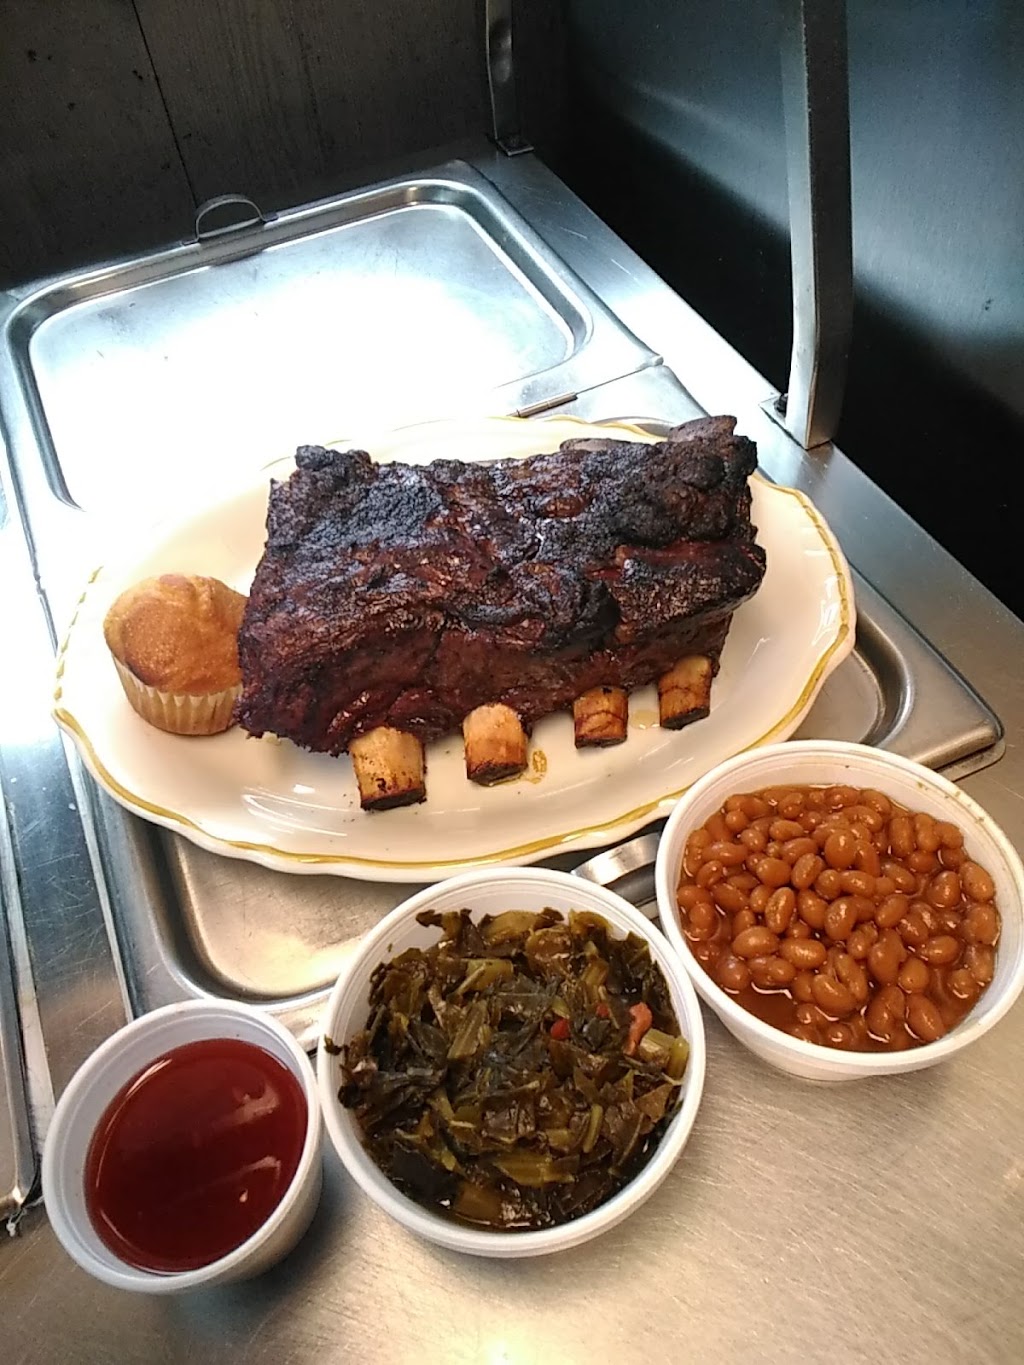 Southern Que BarBQ | 70 Pomeroy Ave, Meriden, CT 06450 | Phone: (203) 238-1542